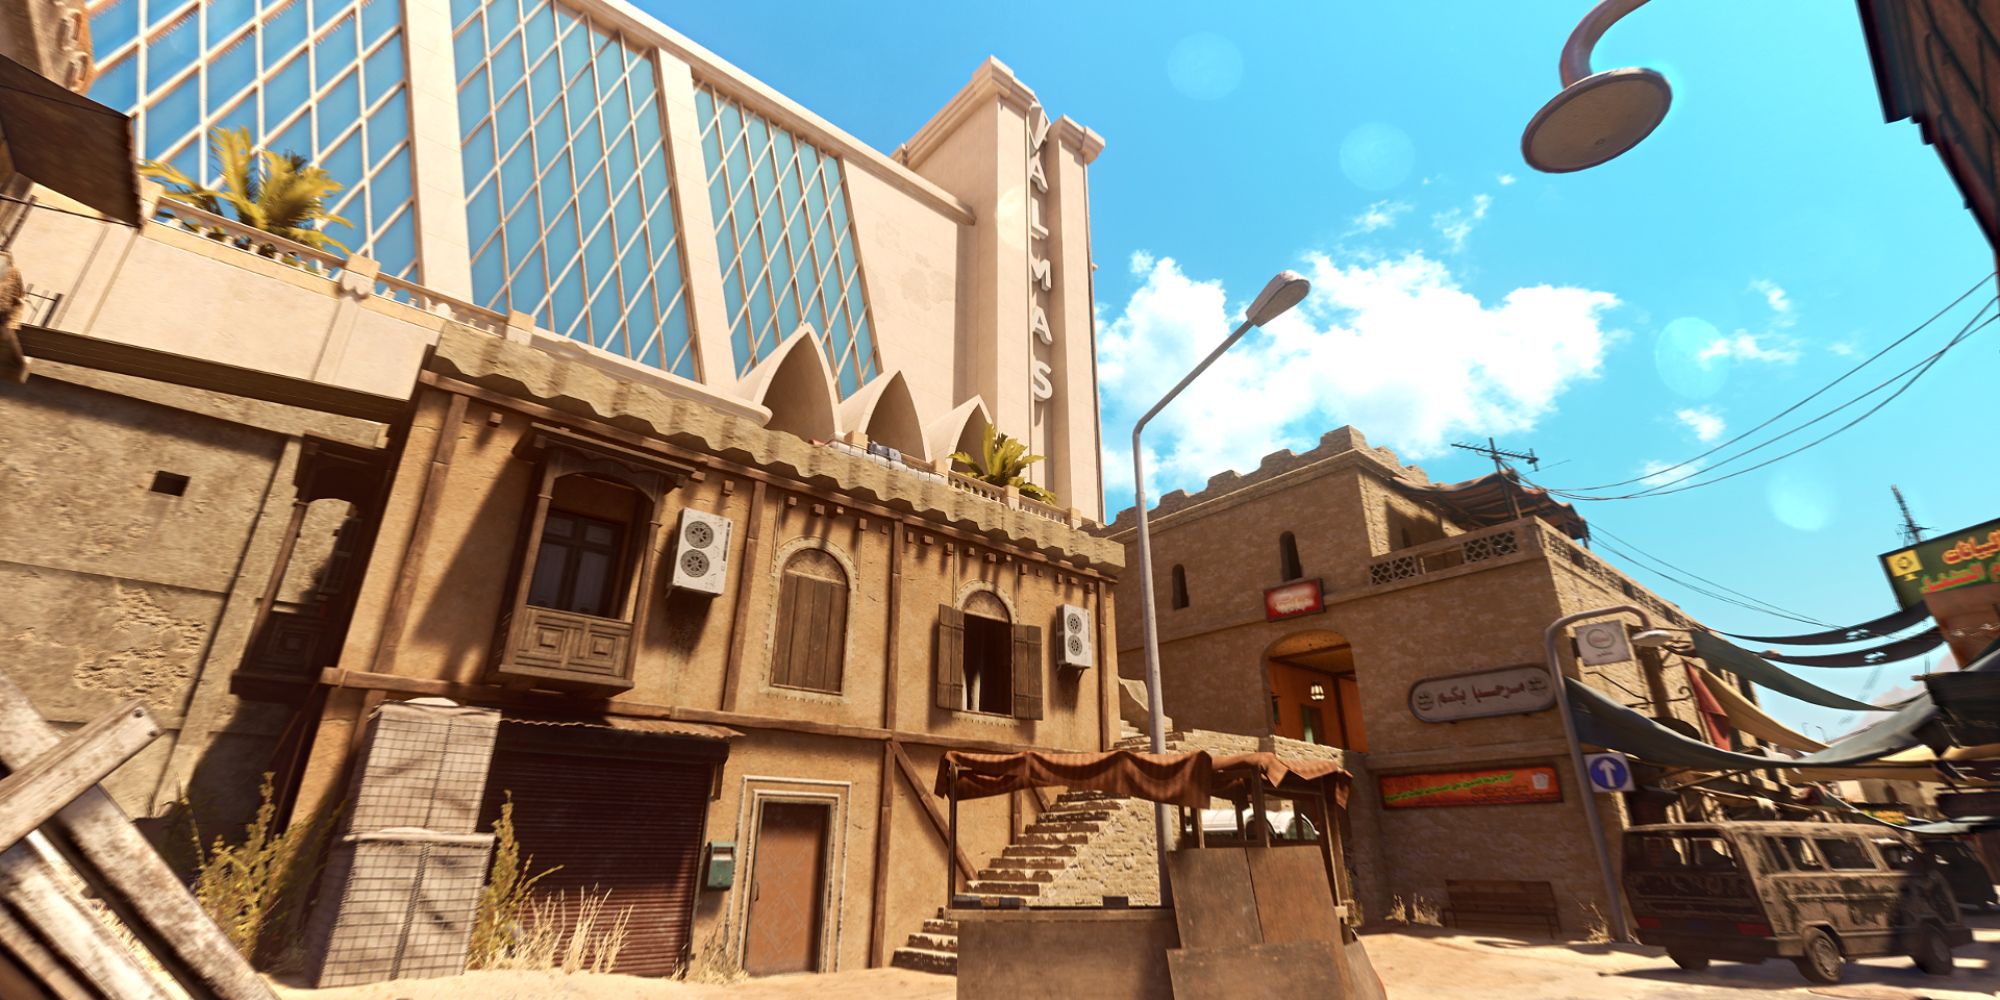 Insurgency Sandstorm Maps a wide shot of the map Gap with small, impoverished homes in the foreground against a towering hotel with a wall of glass windows in the background